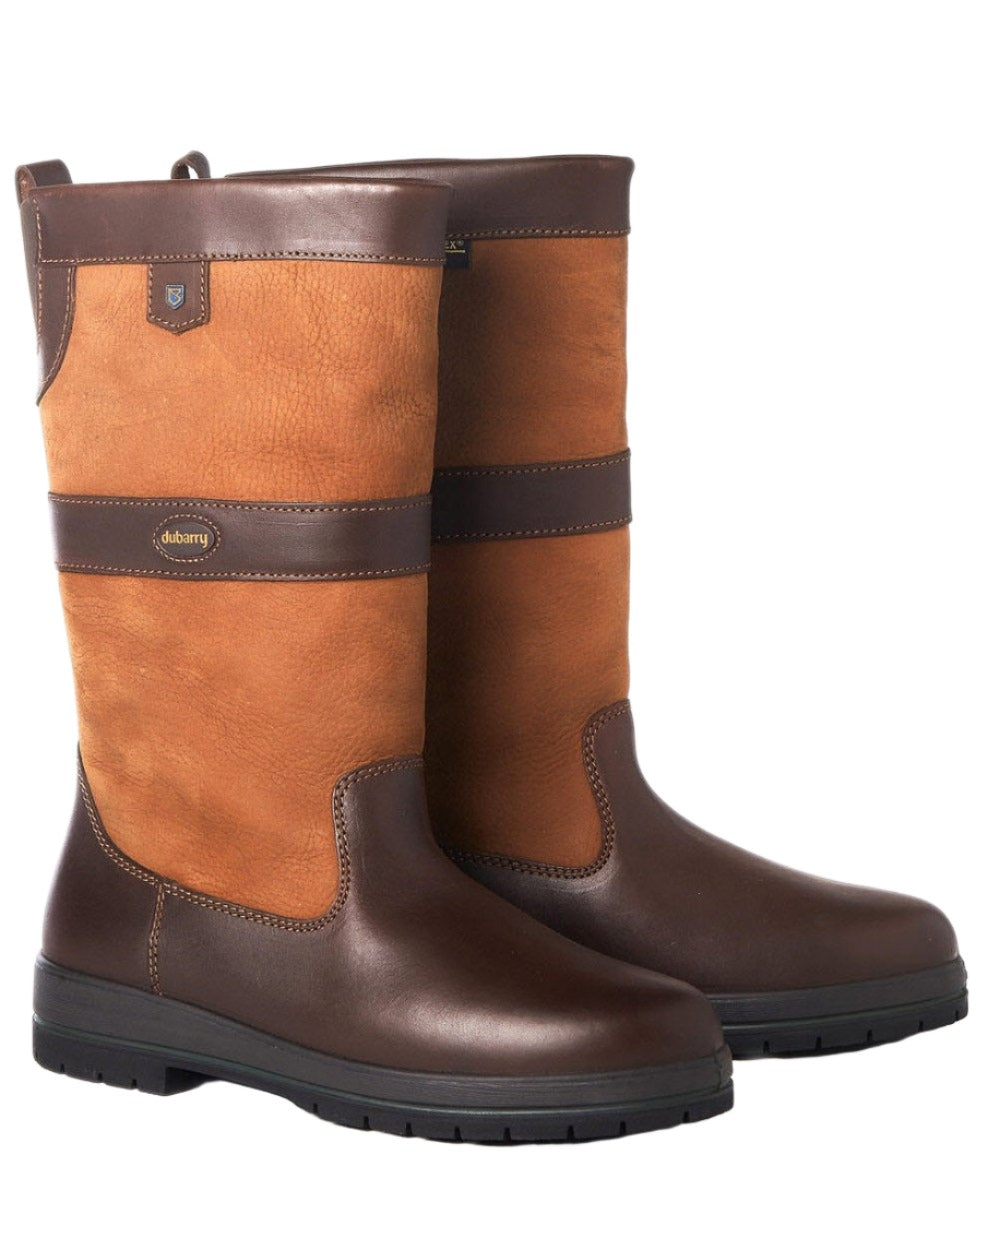 Brown coloured Dubarry Kildare Country Boots on white background 